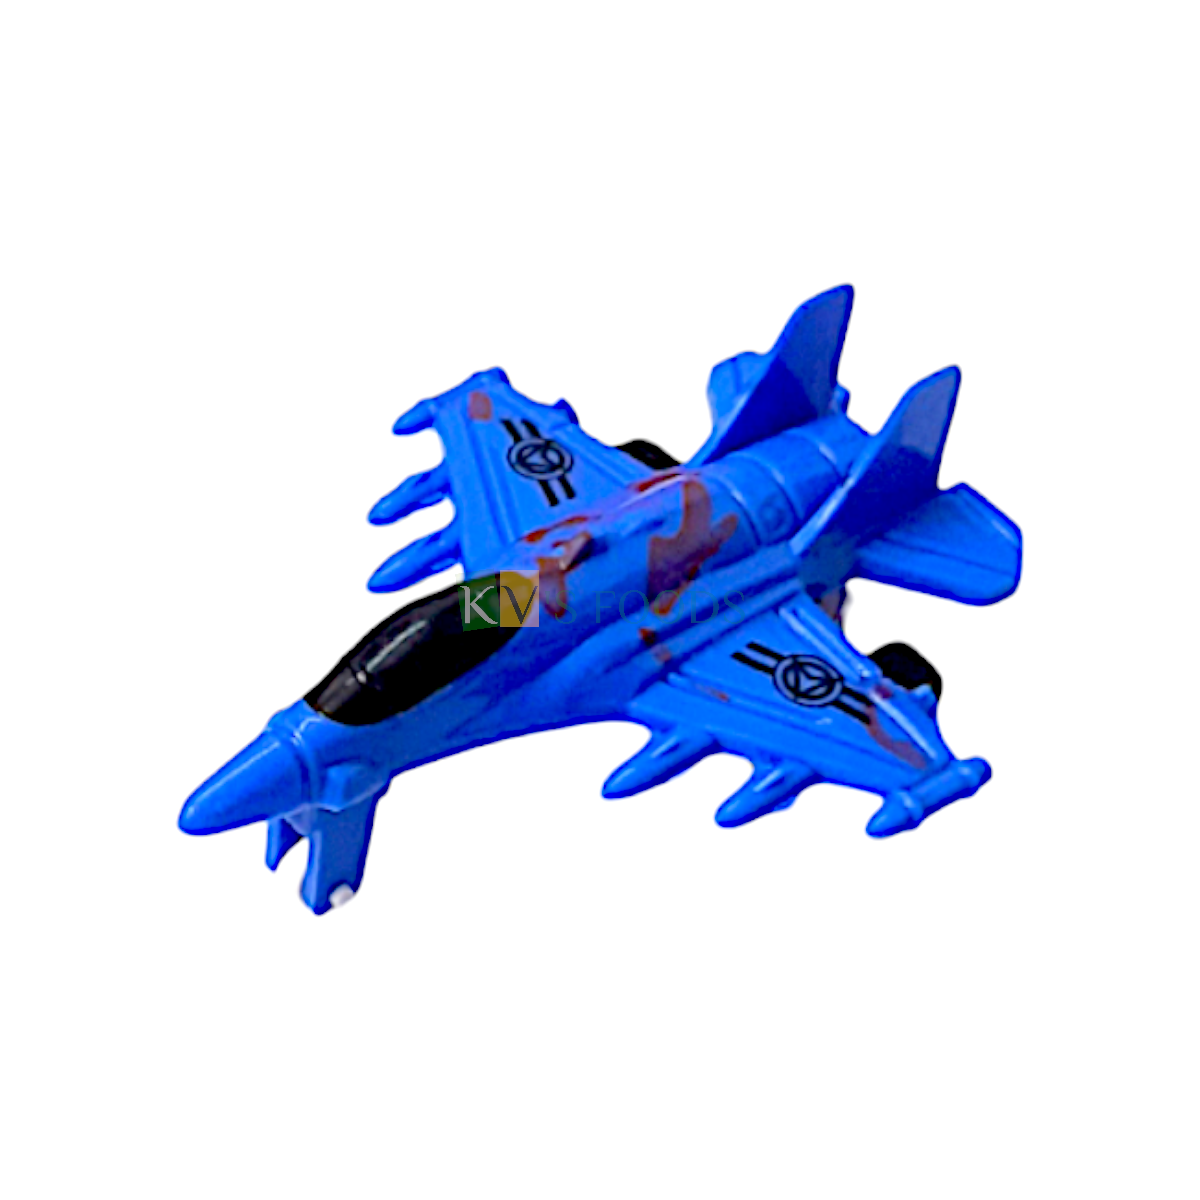 1PC Royal Blue Pull Back and Go Military Fighter Jet Plane Cake Topper, Plane Toys For Kids, Airplane, Aeroplane Cake Topper Toy for Cakes Decoration, Miniature Figurine Cake Topper for Pilot Theme